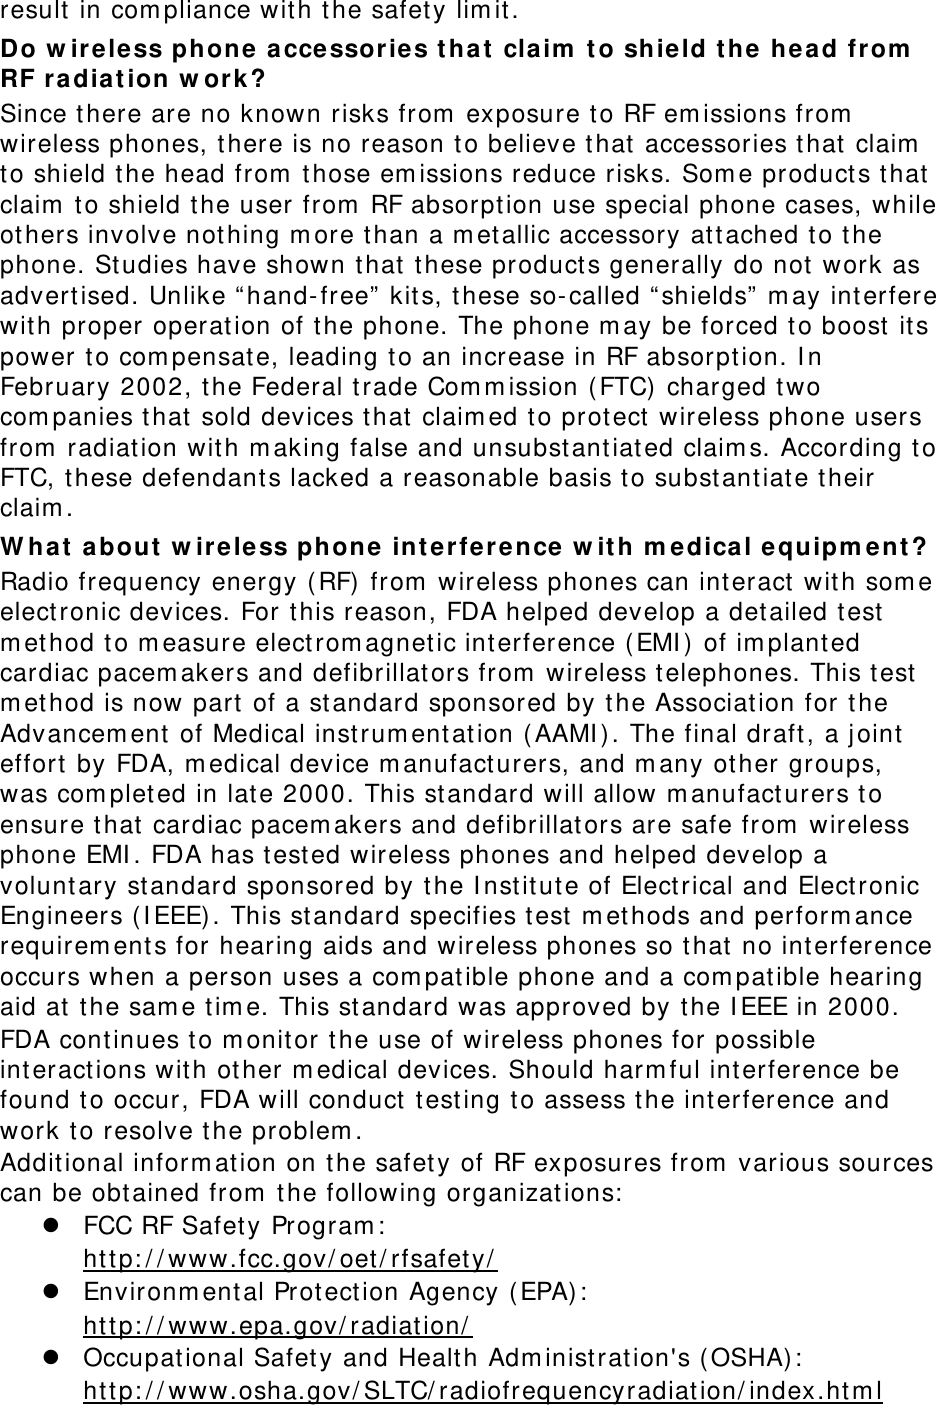 result  in com pliance with the safet y lim it . Do w ireless phone accessories t hat  claim  t o shield t he head from  RF radia t ion w ork? Since t here are no known risks from  exposure t o RF em issions from  wireless phones, t here is no reason t o believe that accessories t hat  claim  to shield t he head from  t hose em issions reduce risks. Som e product s that claim  to shield the user from  RF absorpt ion use special phone cases, while ot hers involve not hing m ore t han a m et allic accessory at tached t o t he phone. Studies have shown t hat t hese product s generally do not  work as advertised. Unlike “ hand- free”  kit s, these so- called “shields”  m ay interfere wit h proper operat ion of t he phone. The phone m ay be forced t o boost  it s power t o com pensat e, leading to an increase in RF absorption. I n February 2002, the Federal trade Com m ission (FTC) charged t wo com panies t hat  sold devices t hat  claim ed t o protect wireless phone users from  radiat ion with m aking false and unsubst antiat ed claim s. According t o FTC, these defendants lacked a reasonable basis to subst antiate t heir claim . W hat a bout  w ireless phone  int e r ference  w it h m edica l e quipm e nt ? Radio frequency energy ( RF) from  wireless phones can int eract  with som e elect ronic devices. For t his reason, FDA helped develop a det ailed t est  m ethod t o m easure elect rom agnet ic interference ( EMI )  of im plant ed cardiac pacem akers and defibrillat ors from  wireless t elephones. This t est  m ethod is now part of a standard sponsored by t he Association for t he Advancem ent  of Medical inst rum entat ion ( AAMI ) . The final draft , a j oint effort  by FDA, m edical device m anufact urers, and many ot her groups, was com plet ed in lat e 2000. This st andard will allow m anufact urers t o ensure that cardiac pacem akers and defibrillat ors are safe from  wireless phone EMI . FDA has test ed wireless phones and helped develop a voluntary st andard sponsored by t he I nstit ut e of Electrical and Elect ronic Engineers ( I EEE) . This st andard specifies t est  m ethods and perform ance requirem ent s for hearing aids and wireless phones so t hat  no interference occurs when a person uses a com pat ible phone and a com patible hearing aid at  t he sam e t im e. This standard was approved by the I EEE in 2000. FDA cont inues t o m onit or the use of wireless phones for possible int eractions wit h other m edical devices. Should harm ful interference be found to occur, FDA will conduct  test ing t o assess t he interference and work t o resolve t he problem . Additional inform at ion on t he safet y of RF exposures from  various sources can be obt ained from  the following organizat ions:   FCC RF Safety Program :   ht tp: / / www.fcc.gov/ oet / rfsafet y/   Environm ental Prot ect ion Agency ( EPA) :   ht tp: / / www.epa.gov/ radiation/   Occupat ional Safet y and Health Adm inistrat ion&apos;s (OSHA):          ht t p: / / www.osha.gov/ SLTC/ radiofrequencyradiat ion/ index.htm l 